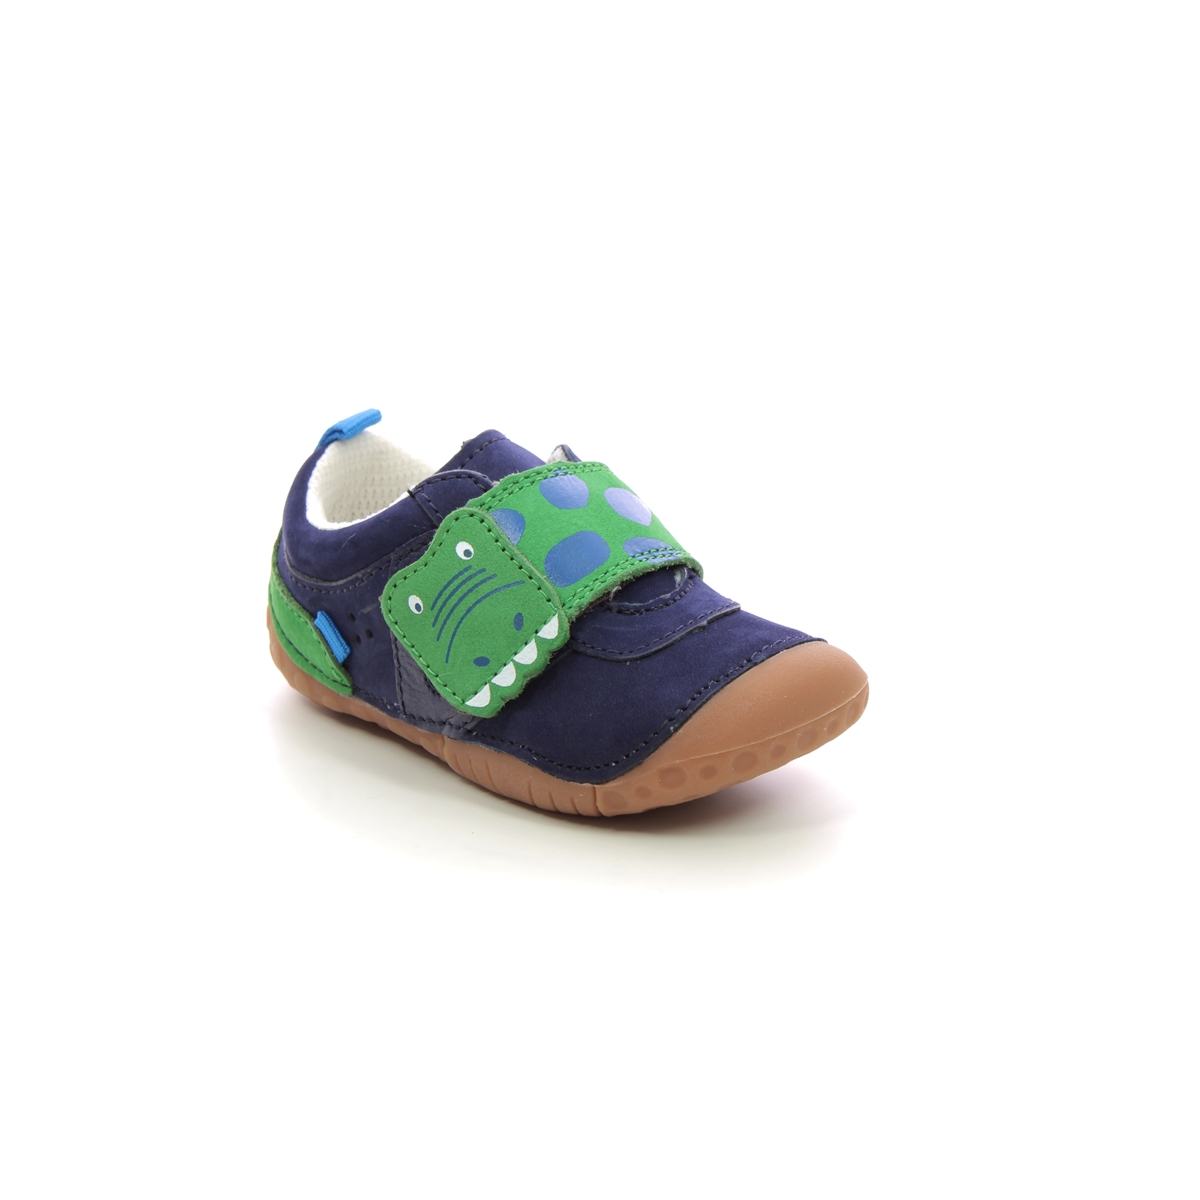 Start Rite - Little Mate 1V In Navy Leather 0819-97G In Size 4.5 In Plain Navy Leather Boys First And Toddler Shoes  In Navy Leather For kids